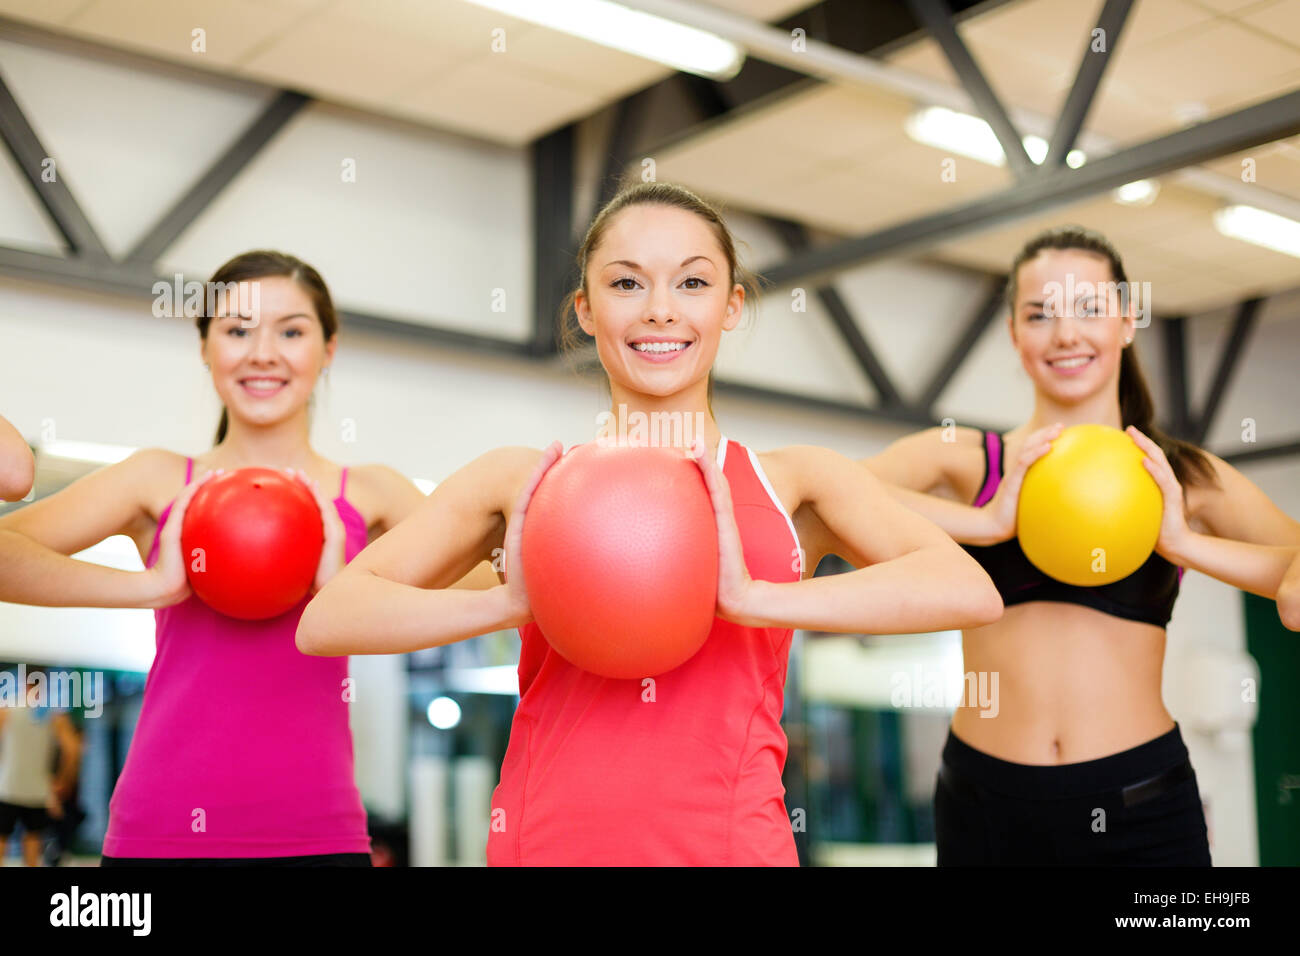 group of people working out with stability balls Stock Photo